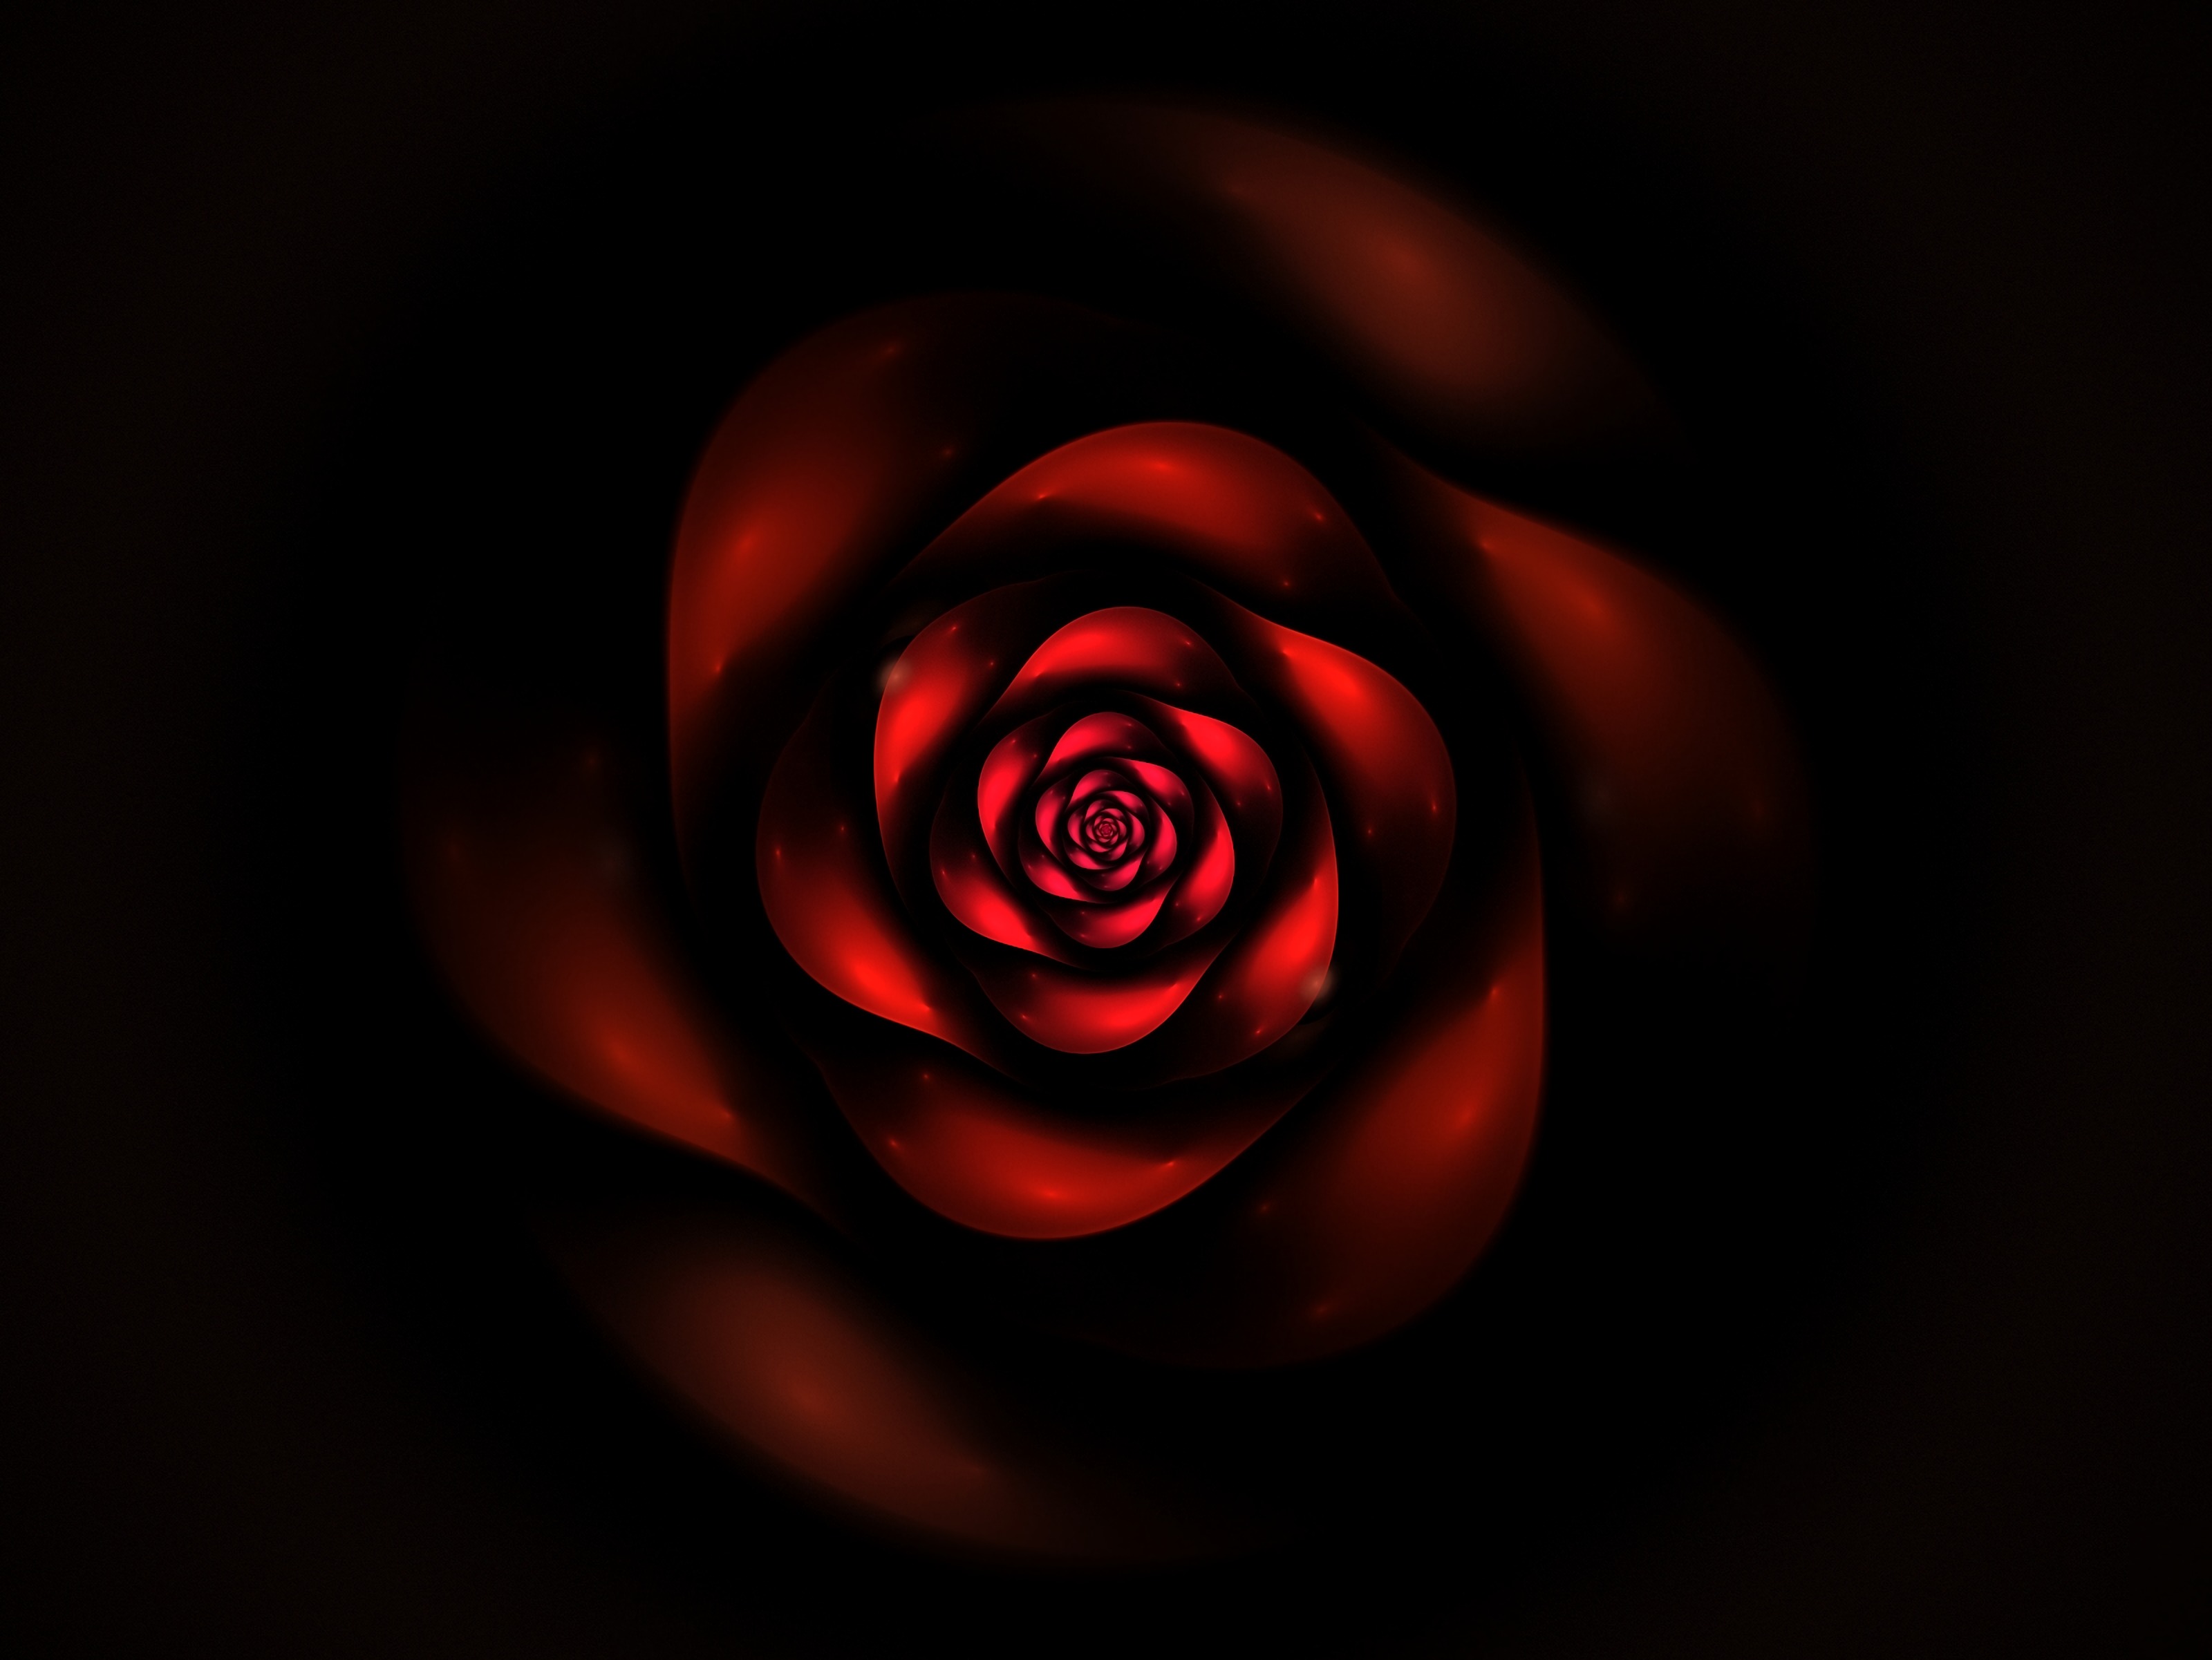 dark, abstract, red, fractal, swirling, involute images